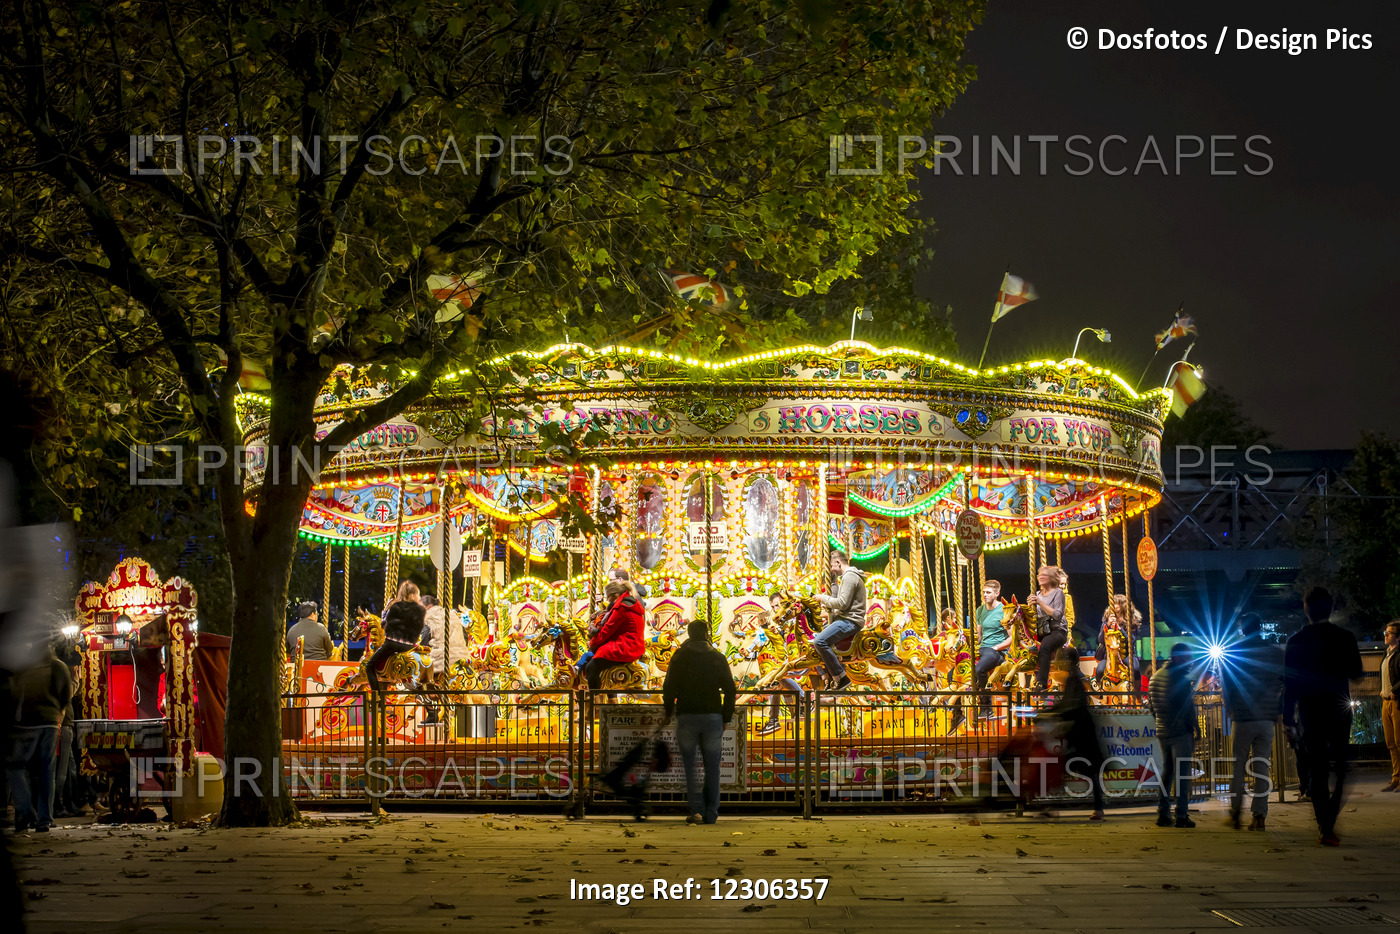 Traditional Carousel In Southbank; London, England